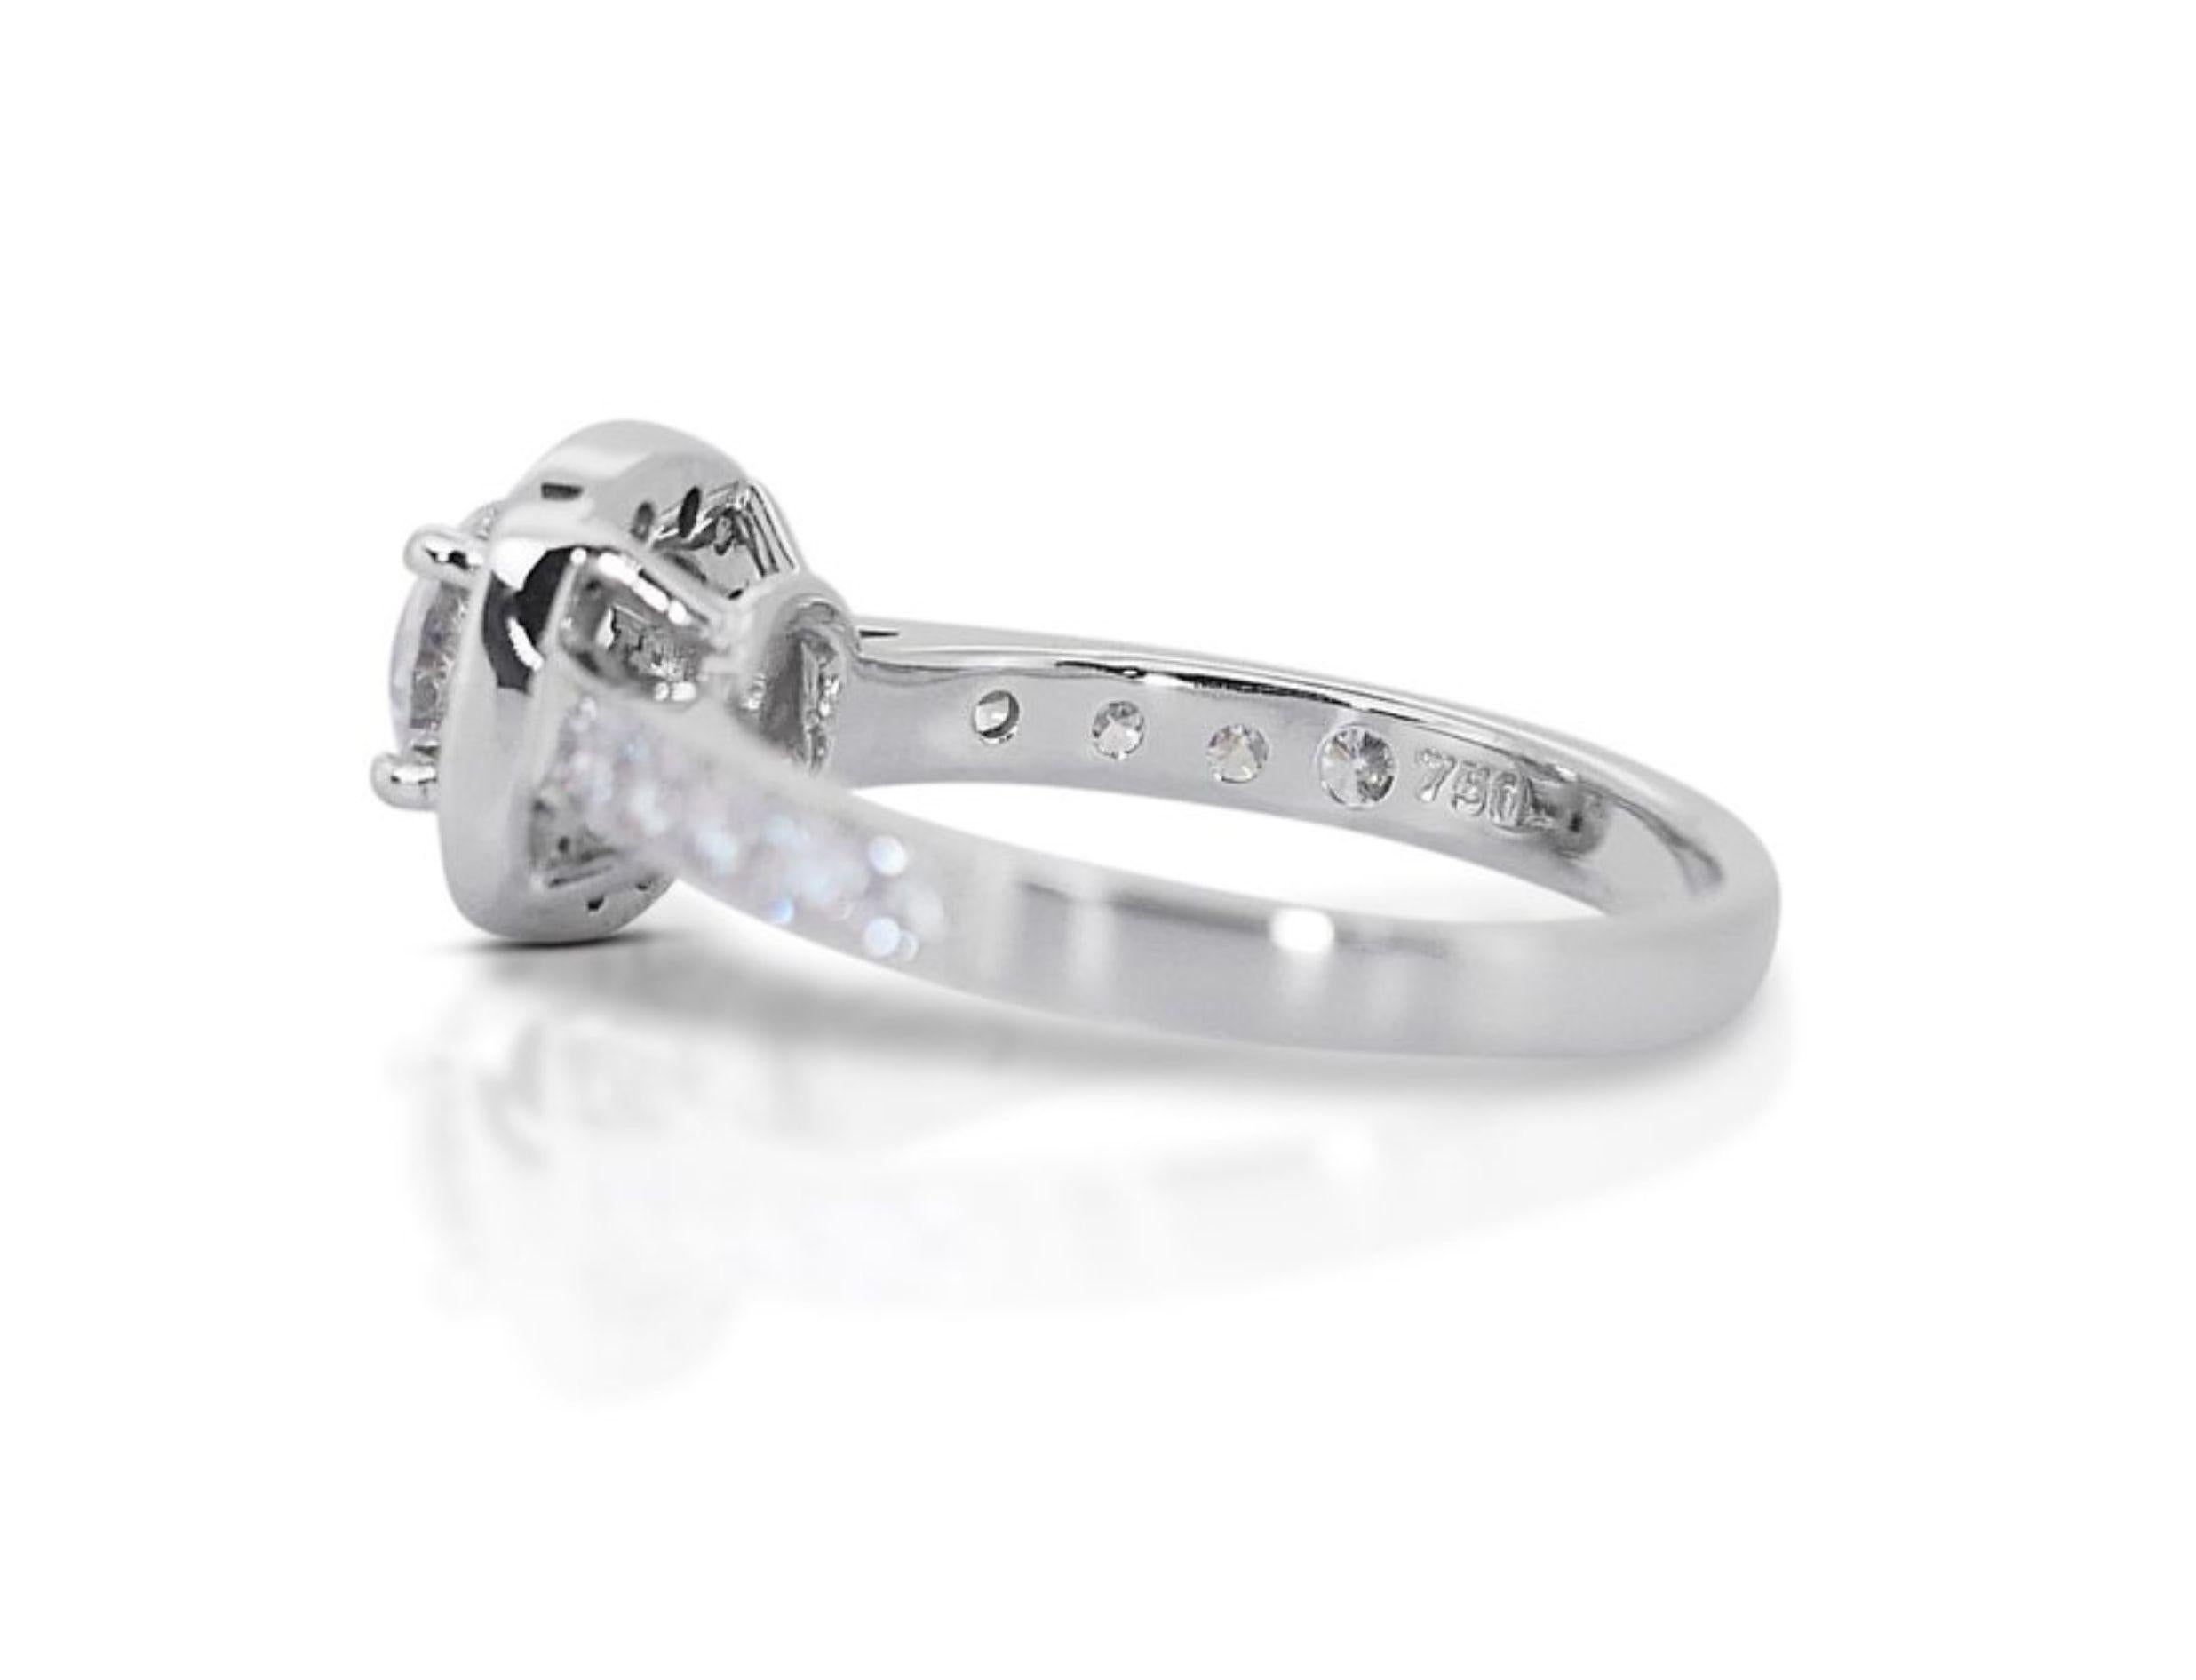 Captivating 0.52ct Pave Diamond Ring set in 18K White Gold In New Condition For Sale In רמת גן, IL